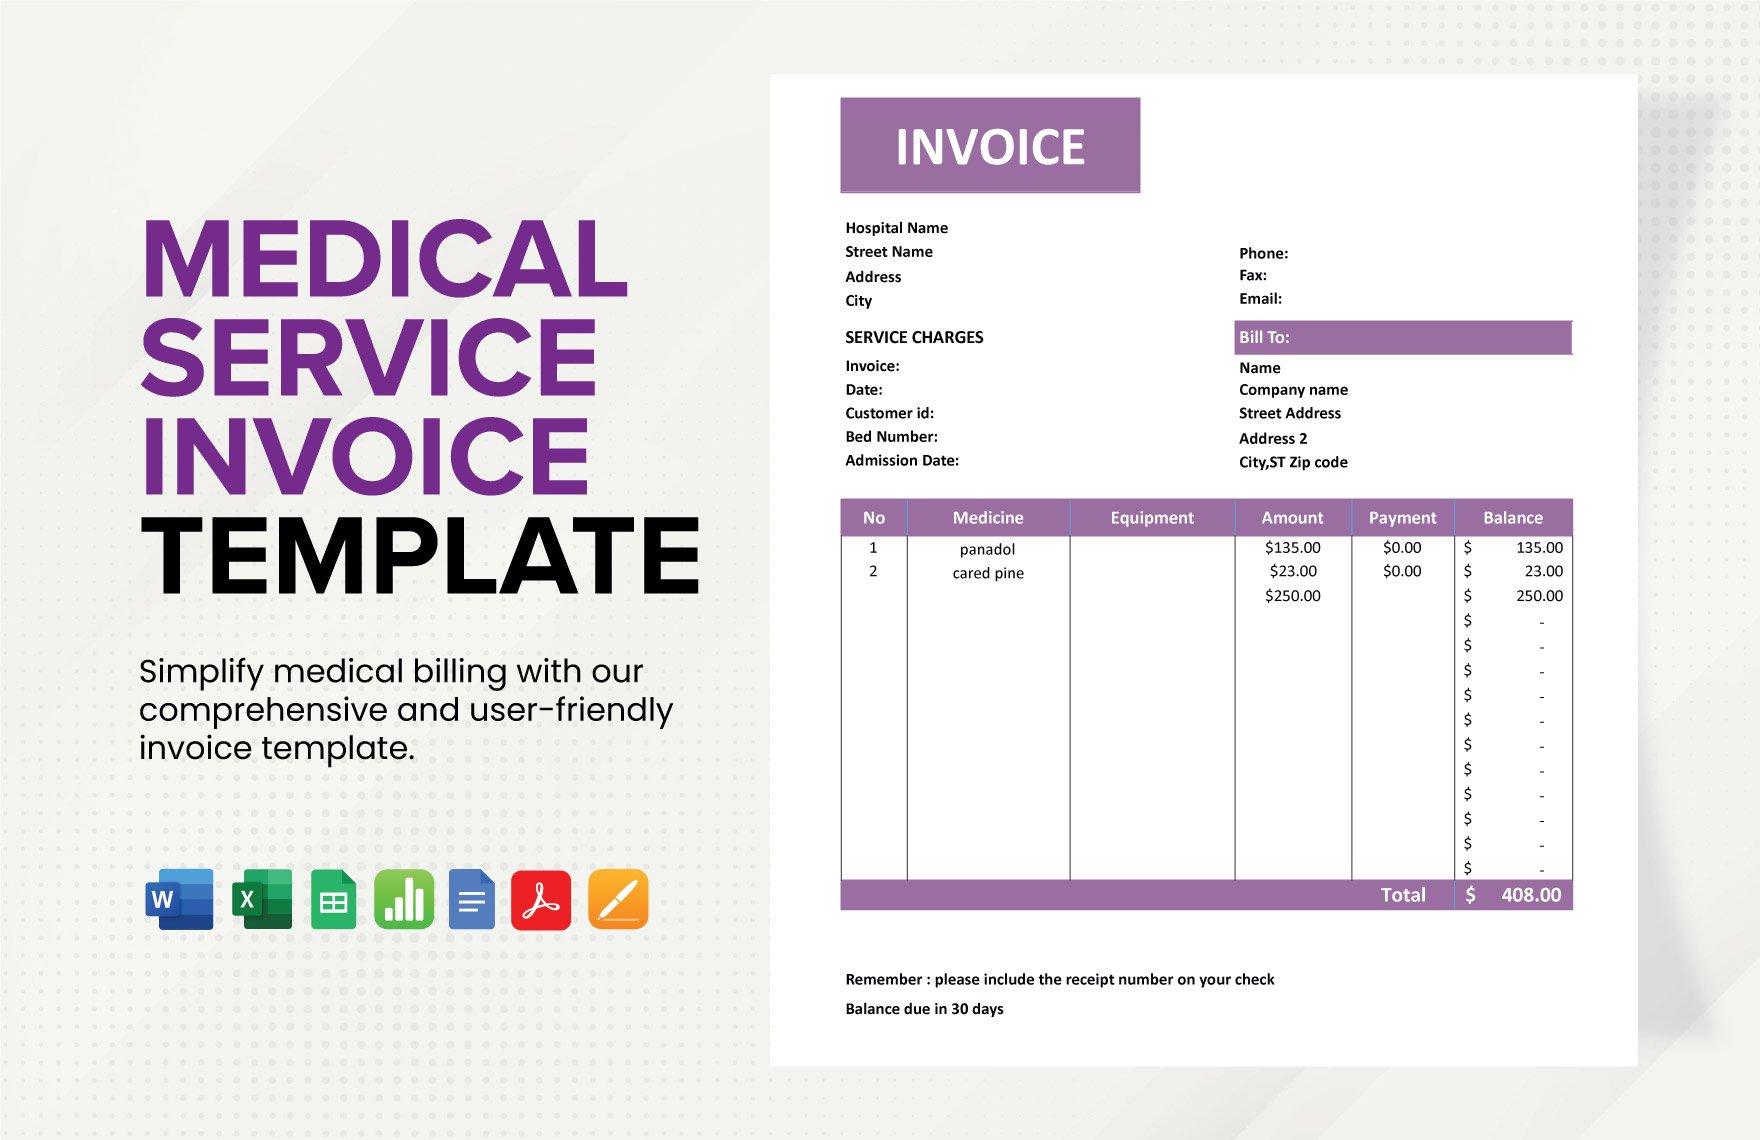 Medical Service Invoice Template in Word, Google Docs, Excel, PDF, Google Sheets, Apple Pages, Apple Numbers